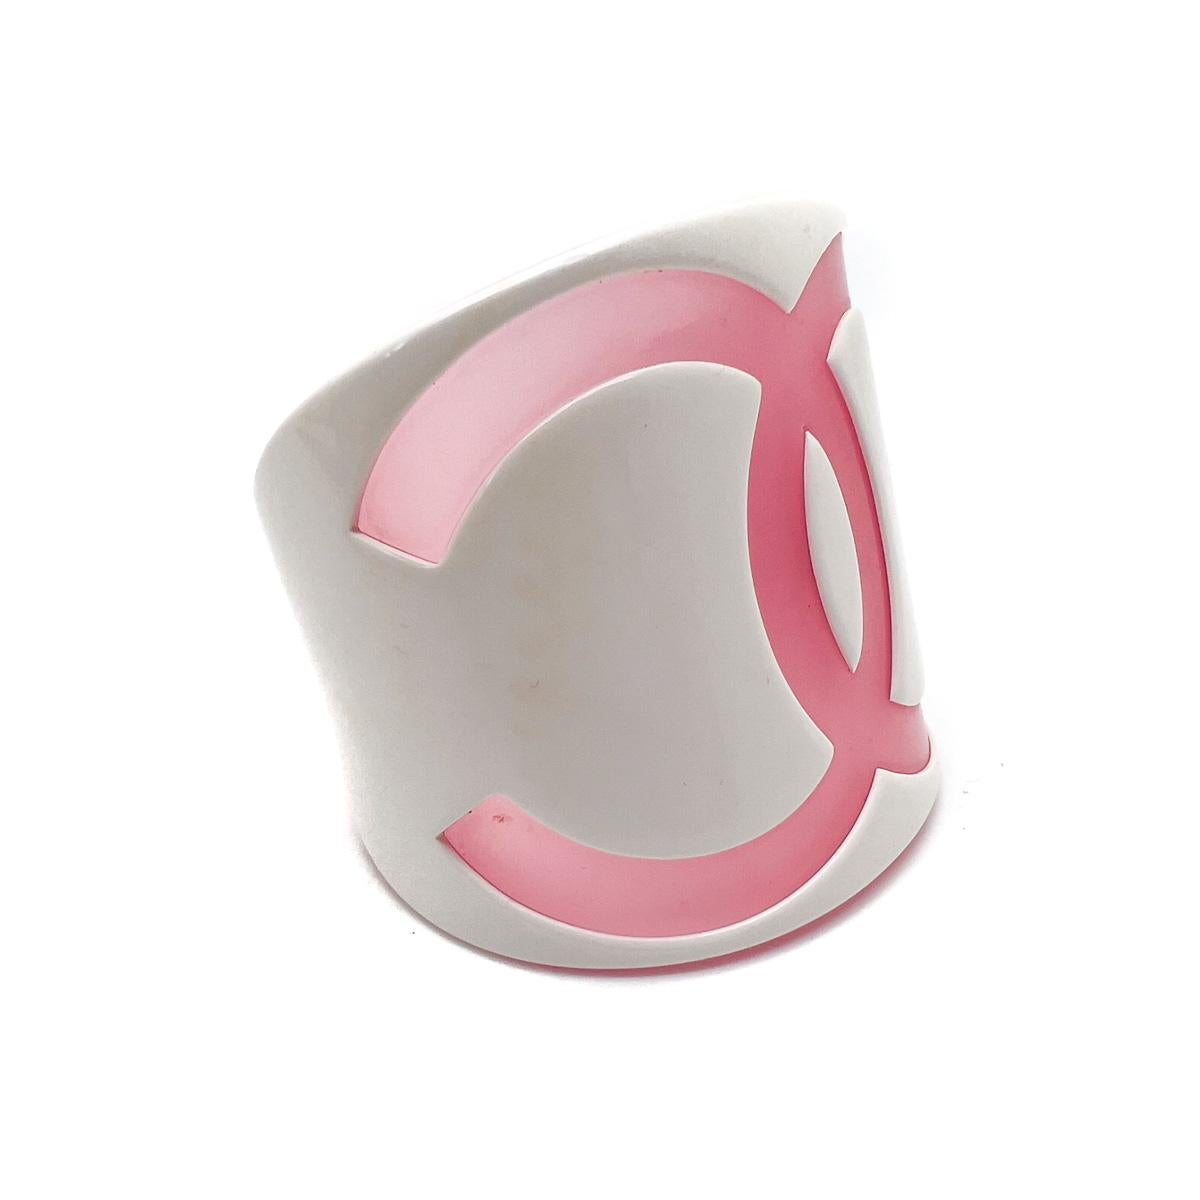 A dreamy vintage noughties Chanel pink cuff that will be adored and coveted.

Vintage Condition: Very good without damage or noteworthy wear.
Signed: Chanel, 2001
Materials: Resin
Fastening: None
Approximate Dimensions: 6cm inner diameter, 2.8cm